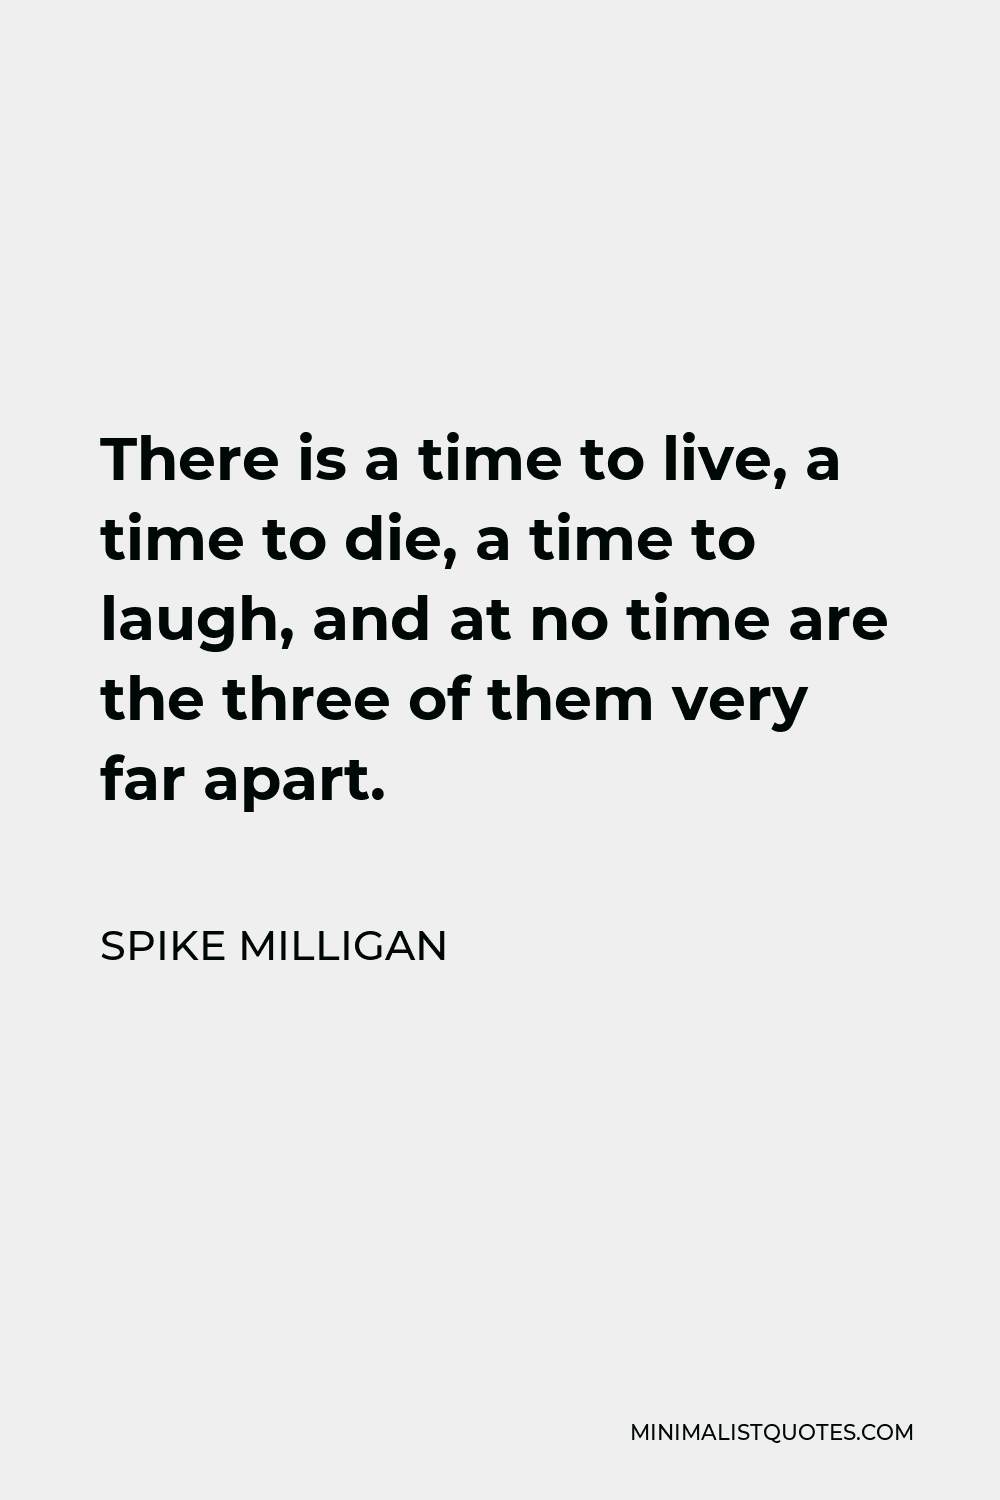 Spike Milligan Quote - There is a time to live, a time to die, a time to laugh, and at no time are the three of them very far apart.